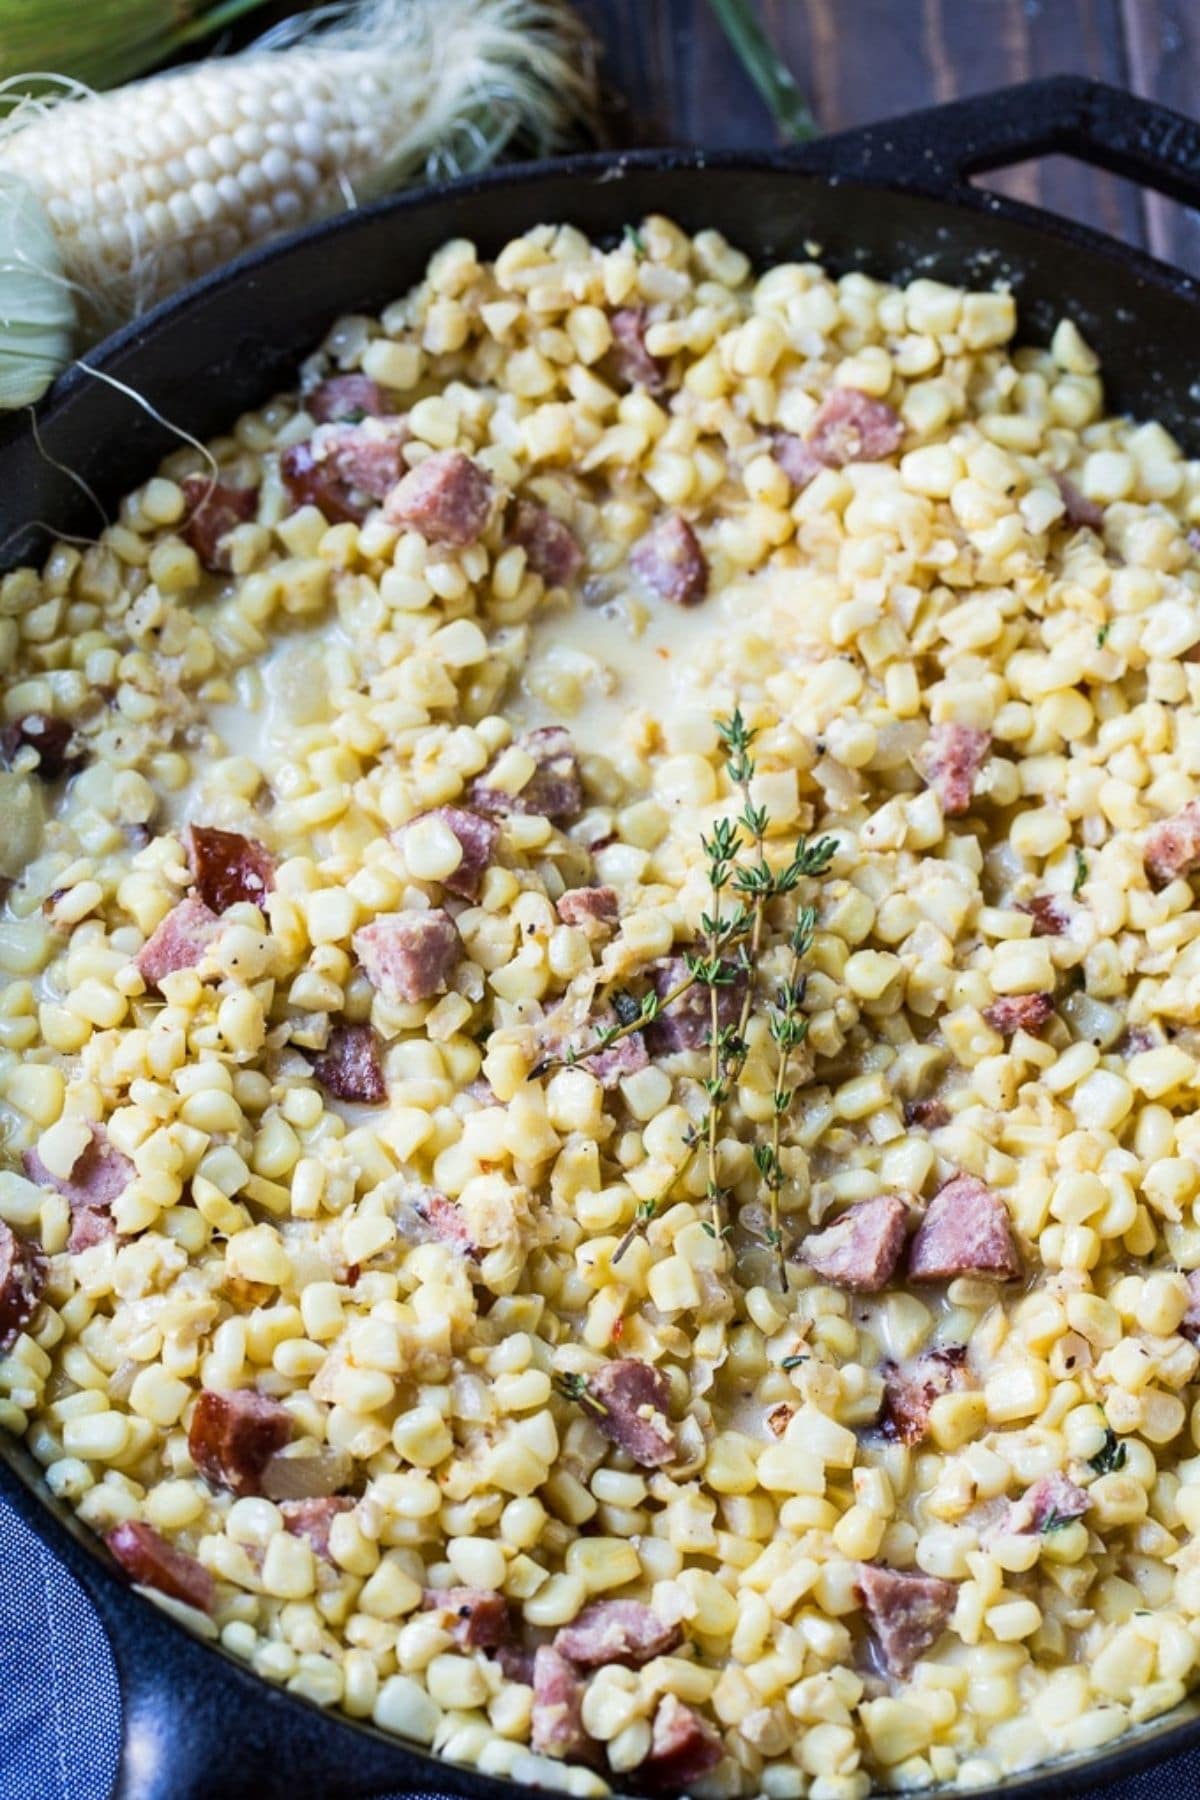 Skillet of corn with pieces of meat throughout